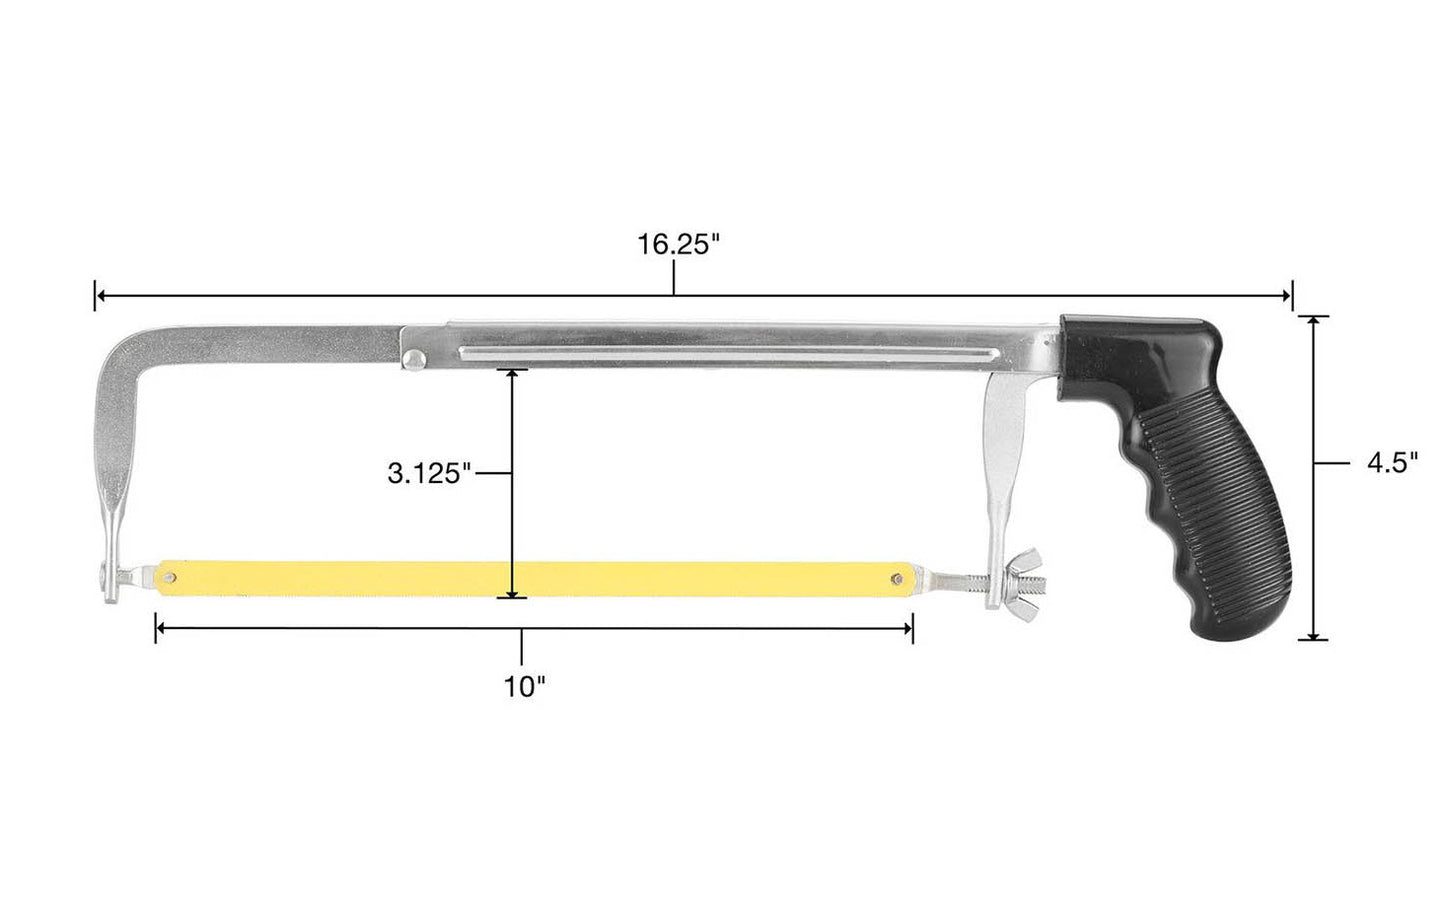 No. 50 GreatNeck Adjustable Pistol Grip Hacksaw is good for cutting glass, ceramic tile, hardened steel, & variety of materials. Heavy duty steel frame provide strength & durability. Adjustable Frame Accepts 10" & 12" Hacksaw Blades. 3" Cutting Depth. High Impact Pistol Grip Handle. Made in USA. 076812009692. 